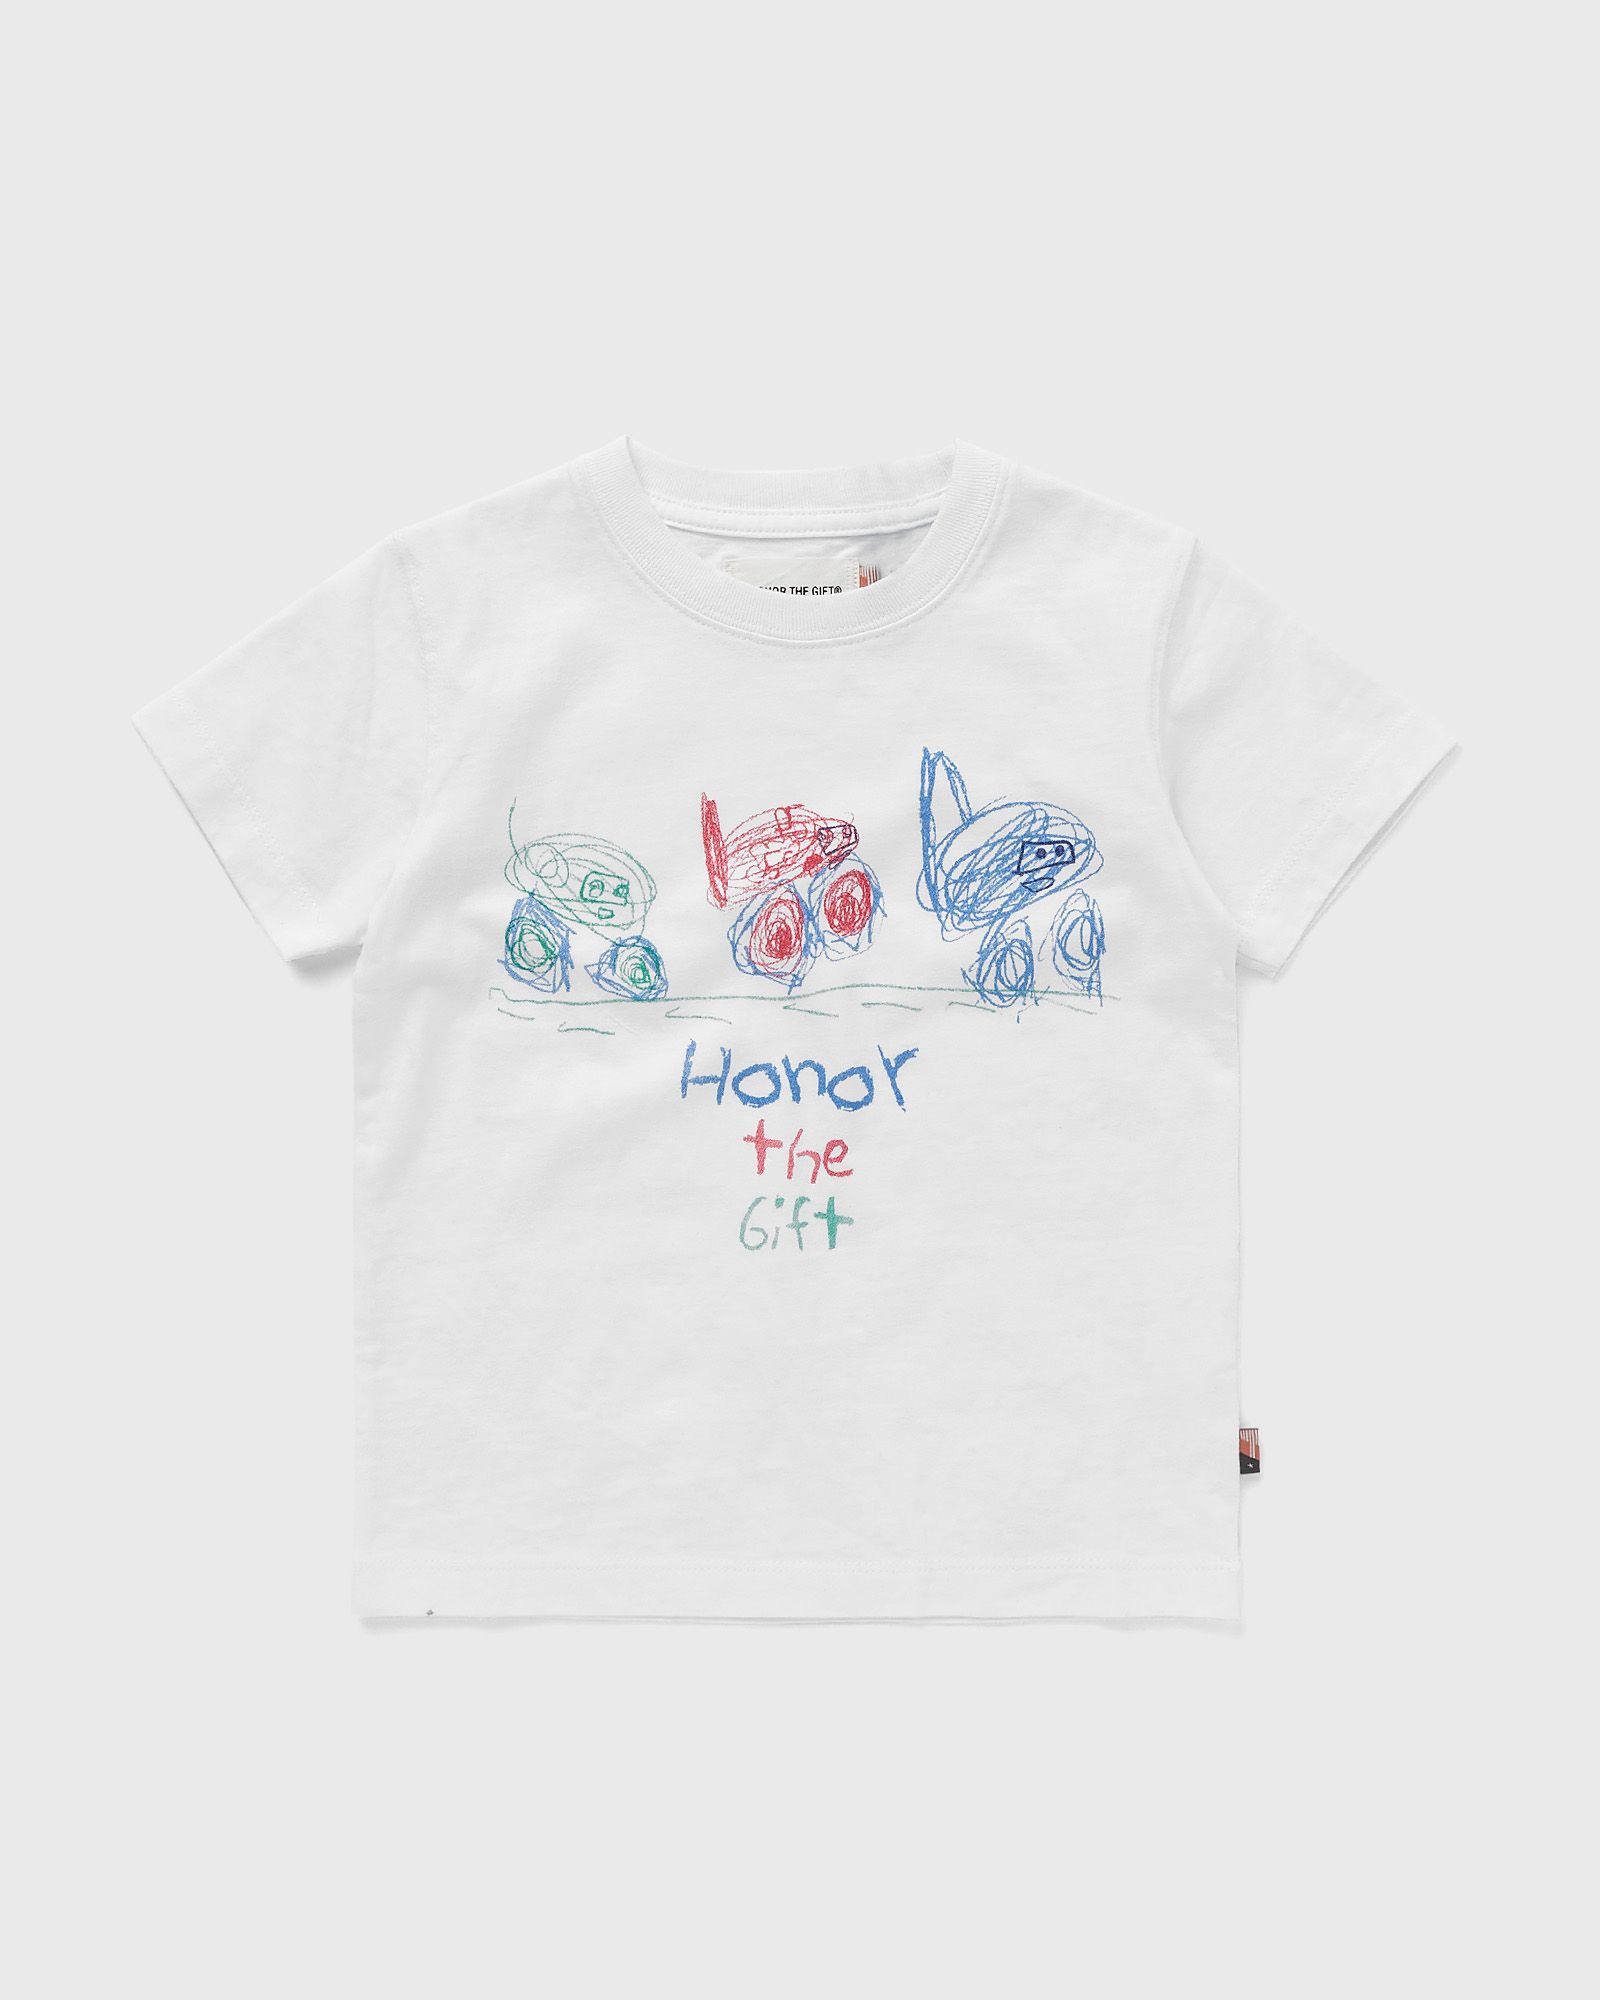 Honor The Gift - fast cars ss tee  tees white in größe:age 2-4 | eu 92-104